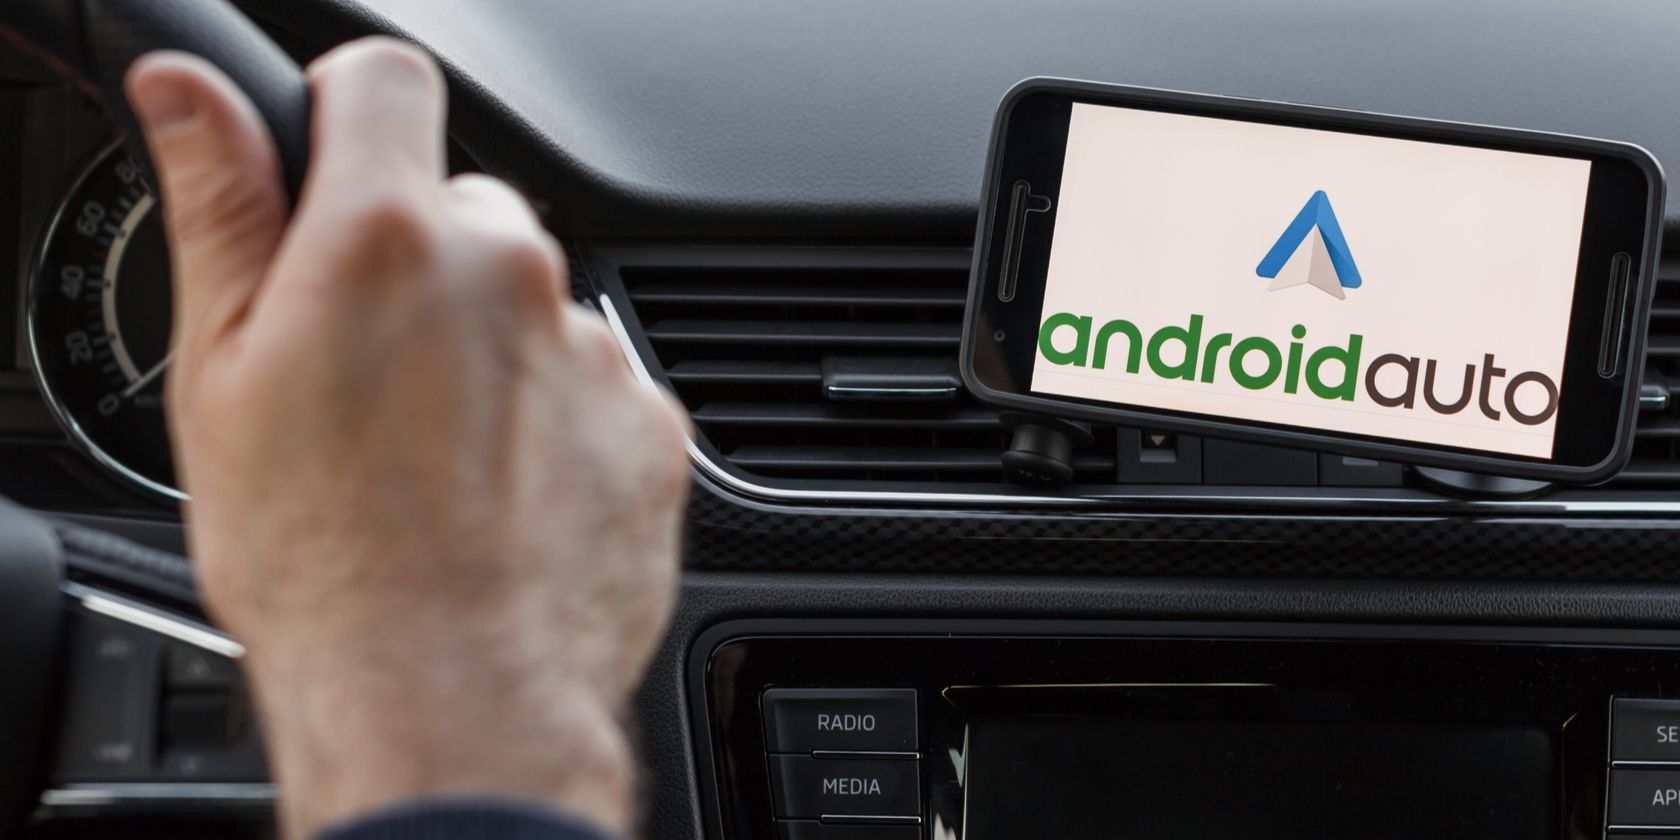 Hands on steering wheel with phone showing Android Auto logo